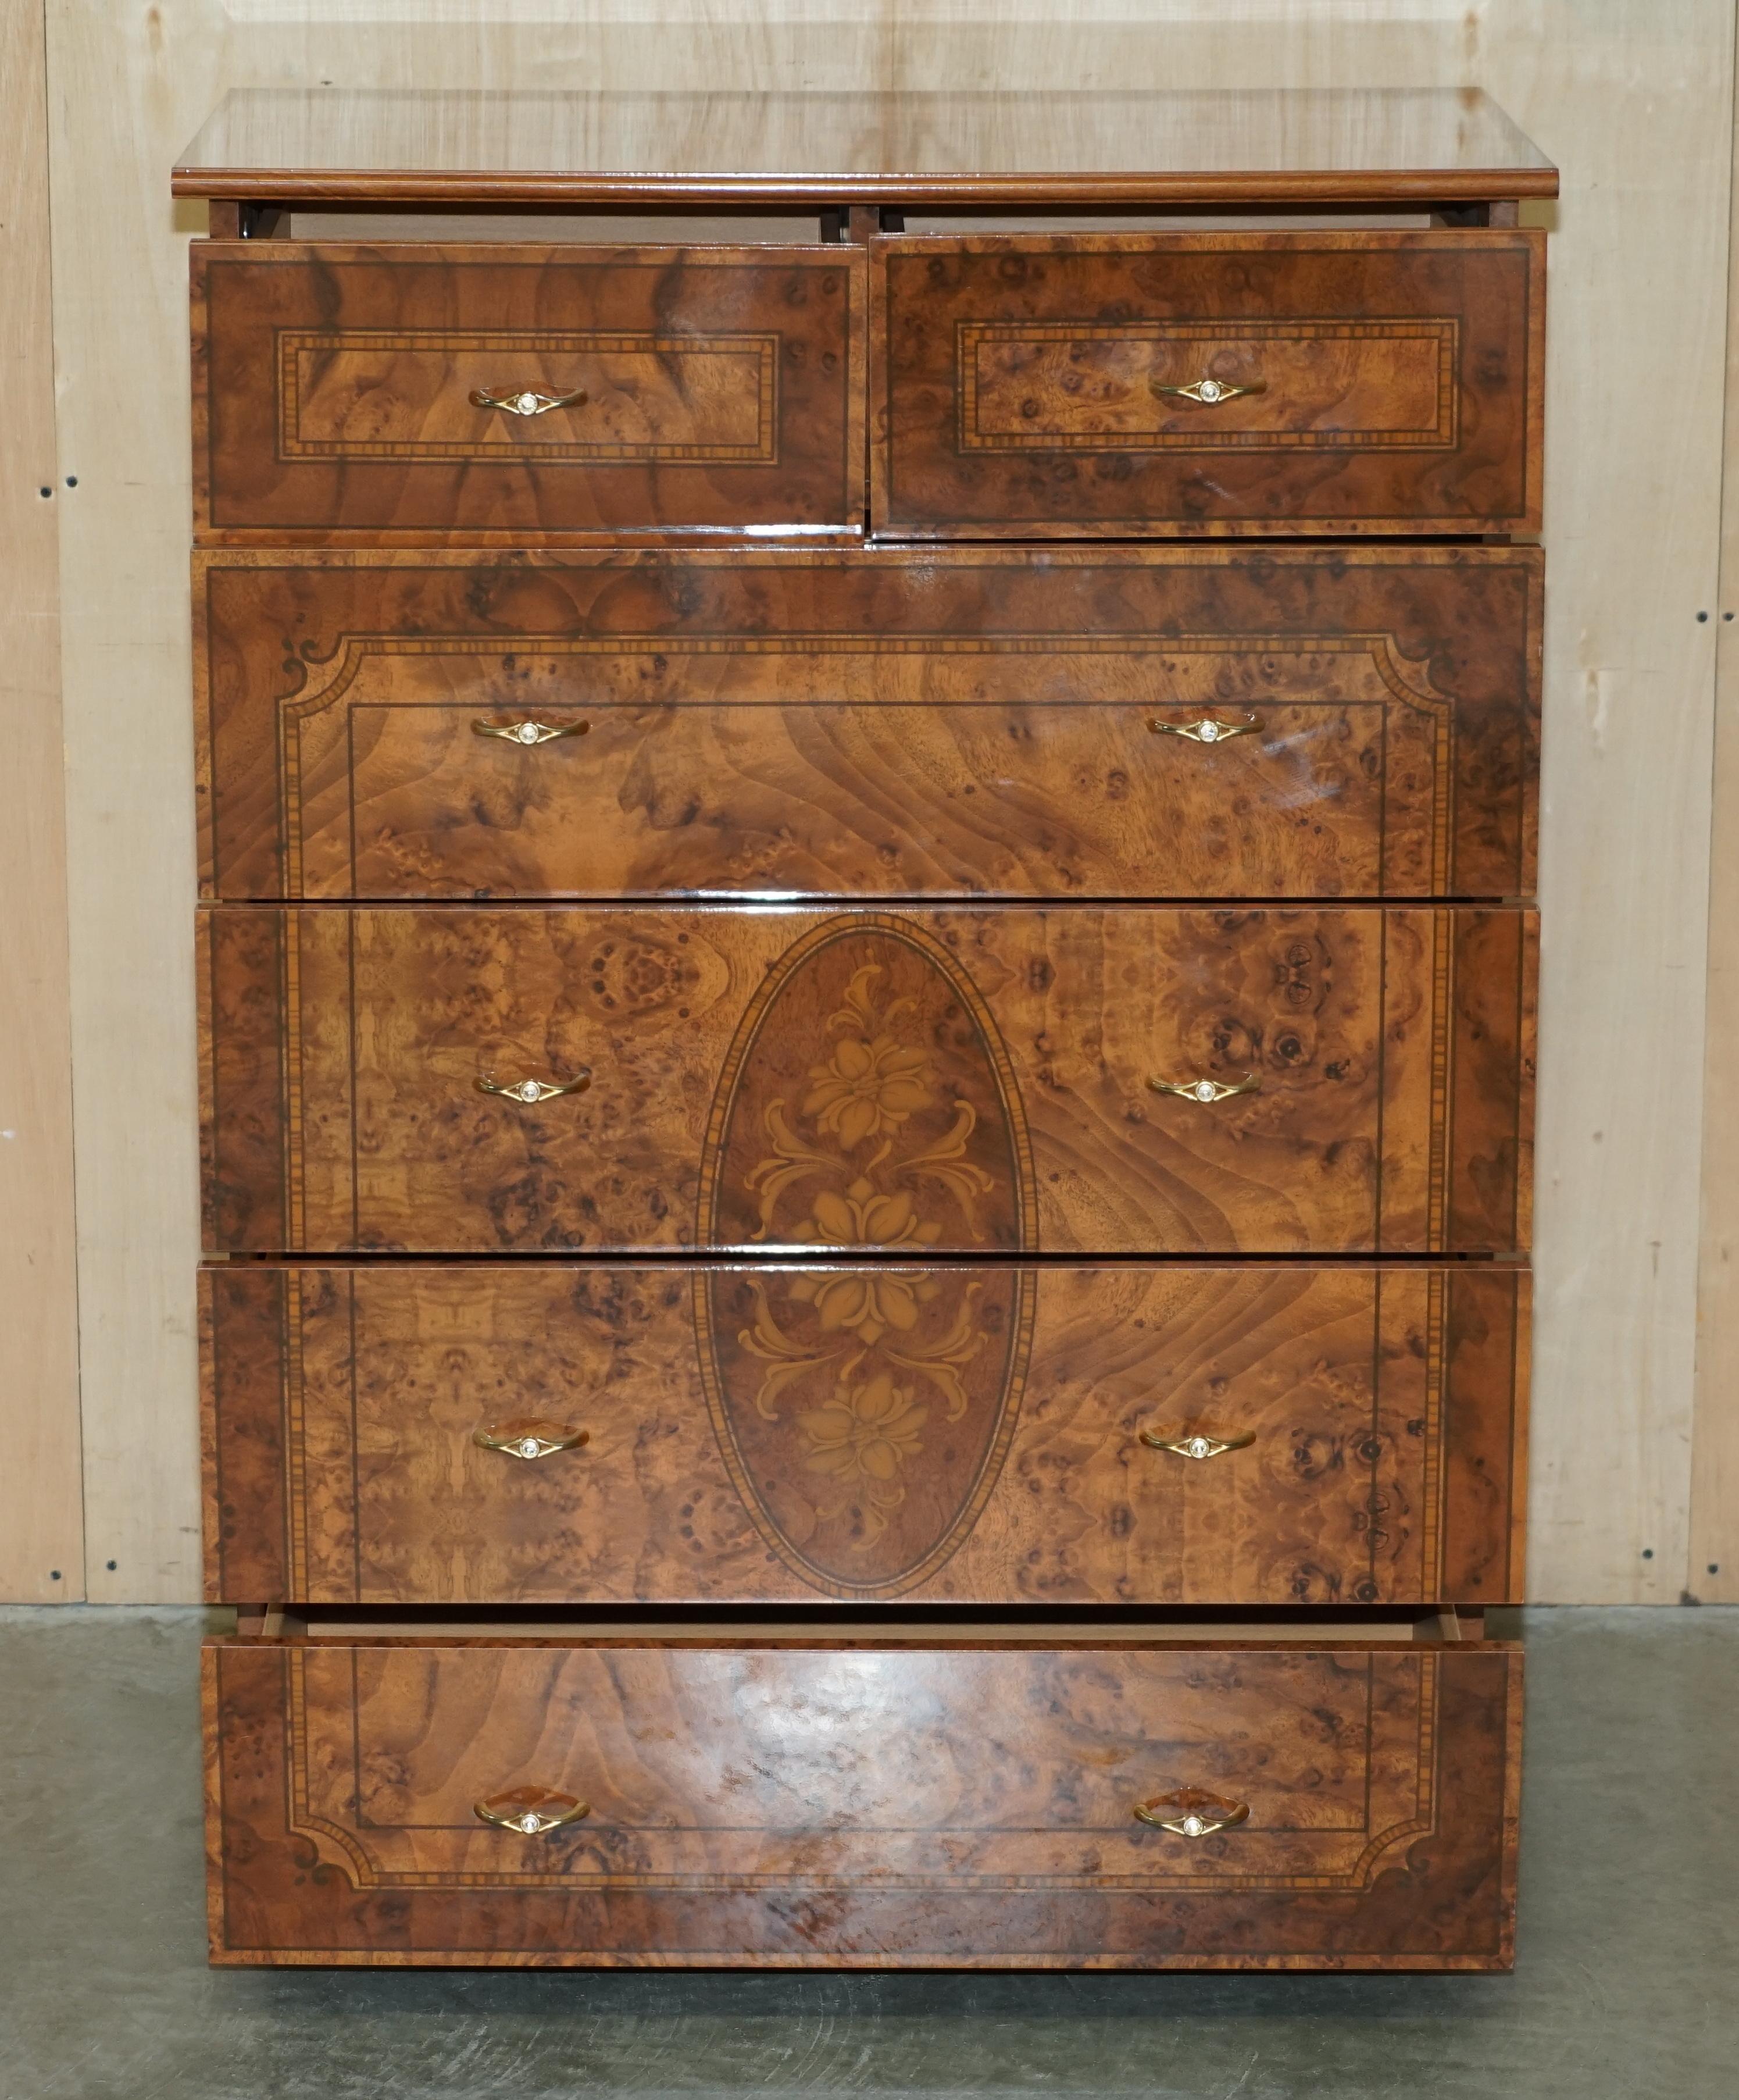 VINTAGE MADE IN ITALY BURR WALNUT VENEER CHEST OF DRAWERS PART OF A SUiTE im Angebot 12